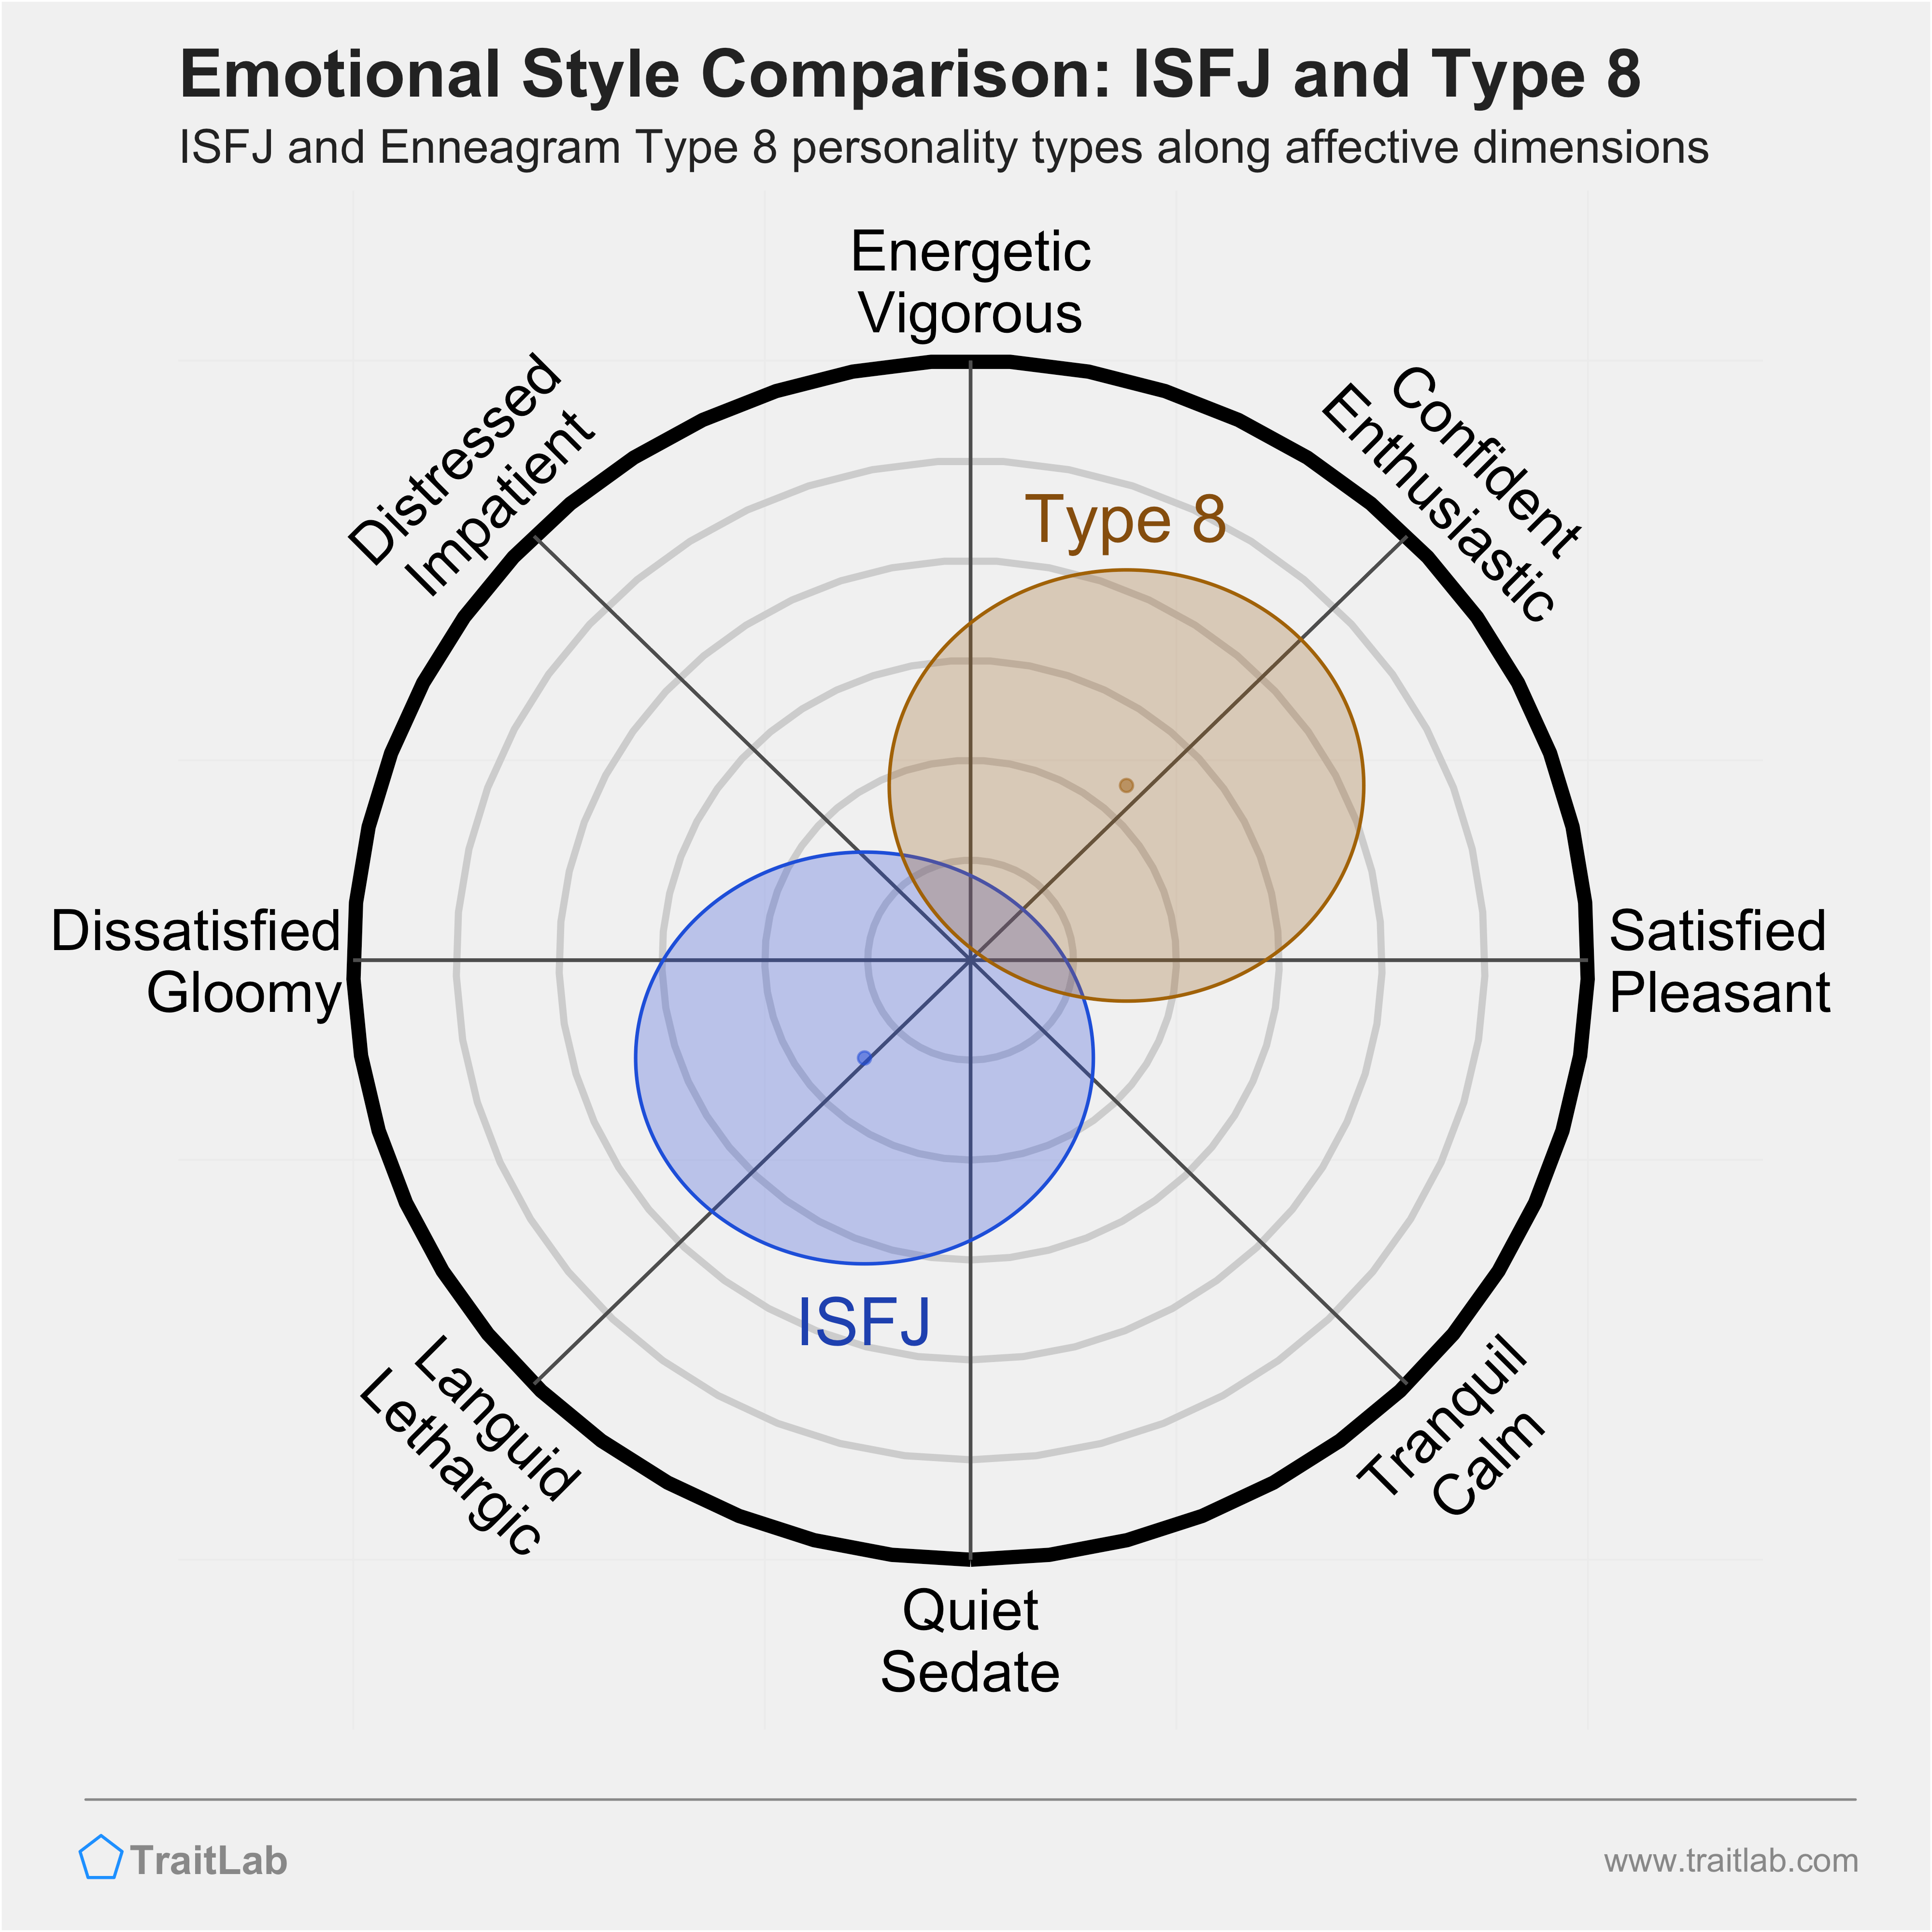 ISFJ and Type 8 comparison across emotional (affective) dimensions